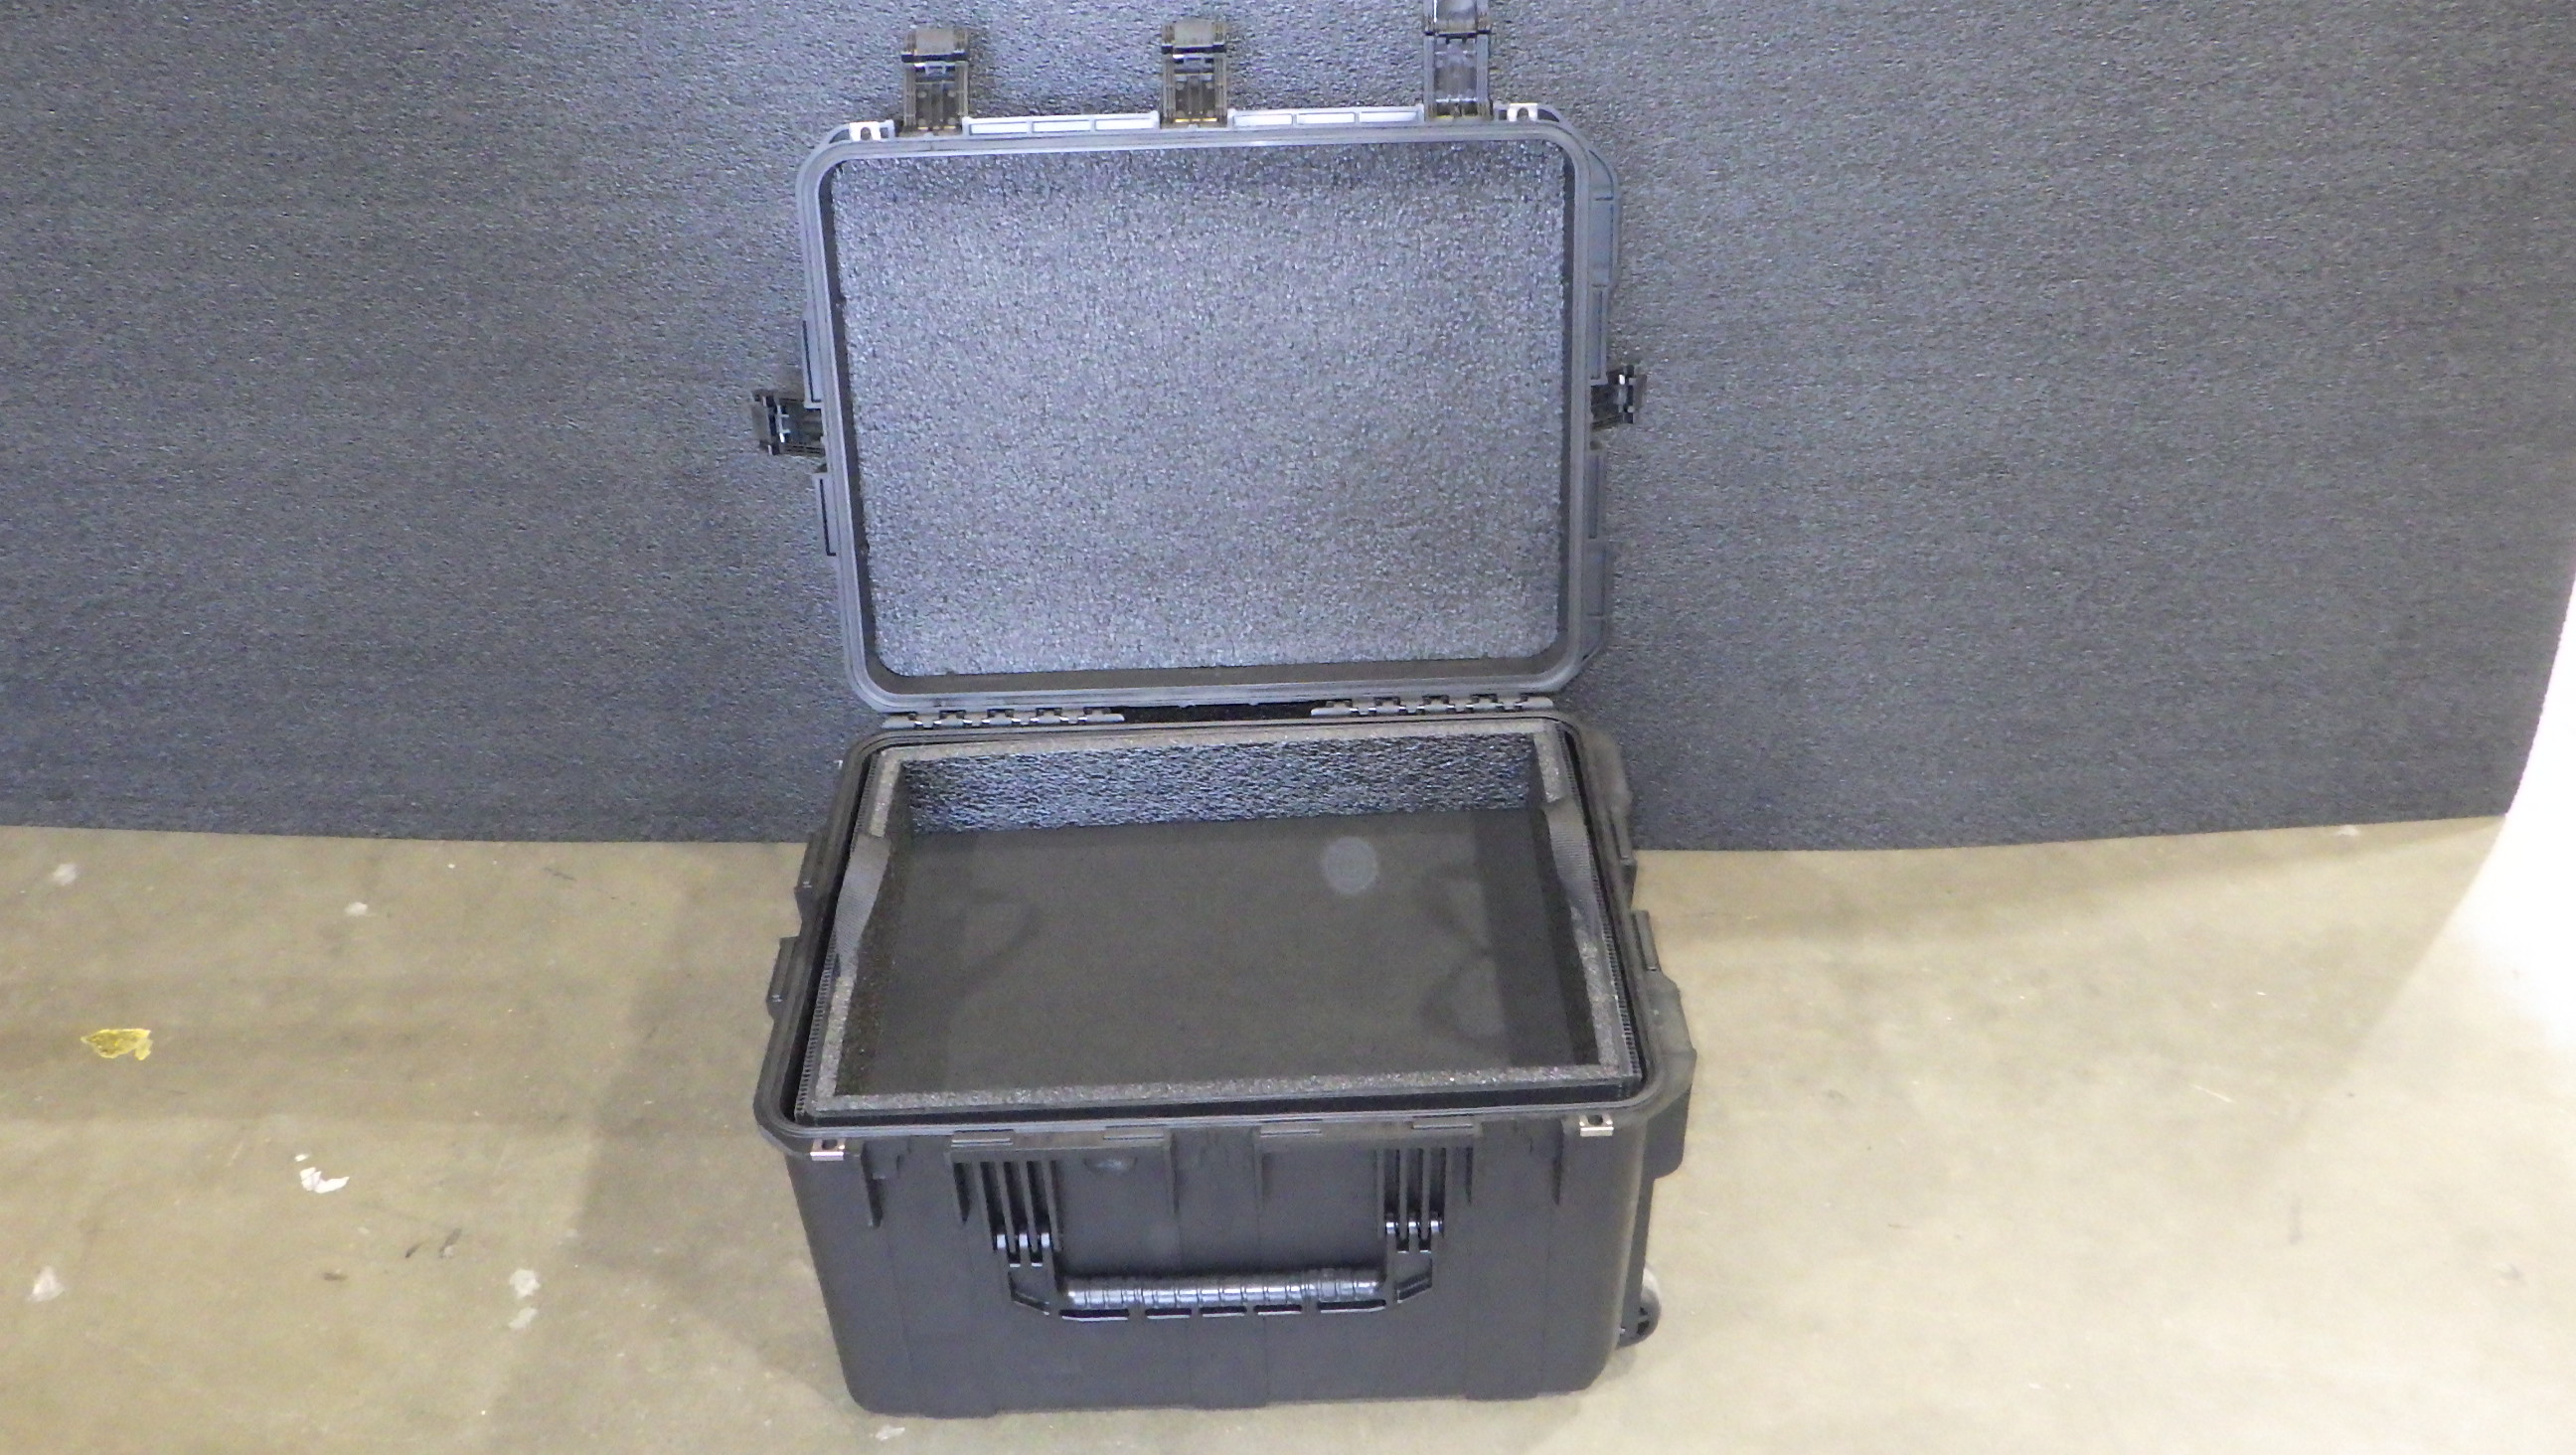 Print # 9687 - SKB 3i-2317-14 Retrofitted for 12-Pack Reidel Bolero Beltpack Kit with Compartments for Power Station and Removable Tray for Headsets By Nelson Case Corp